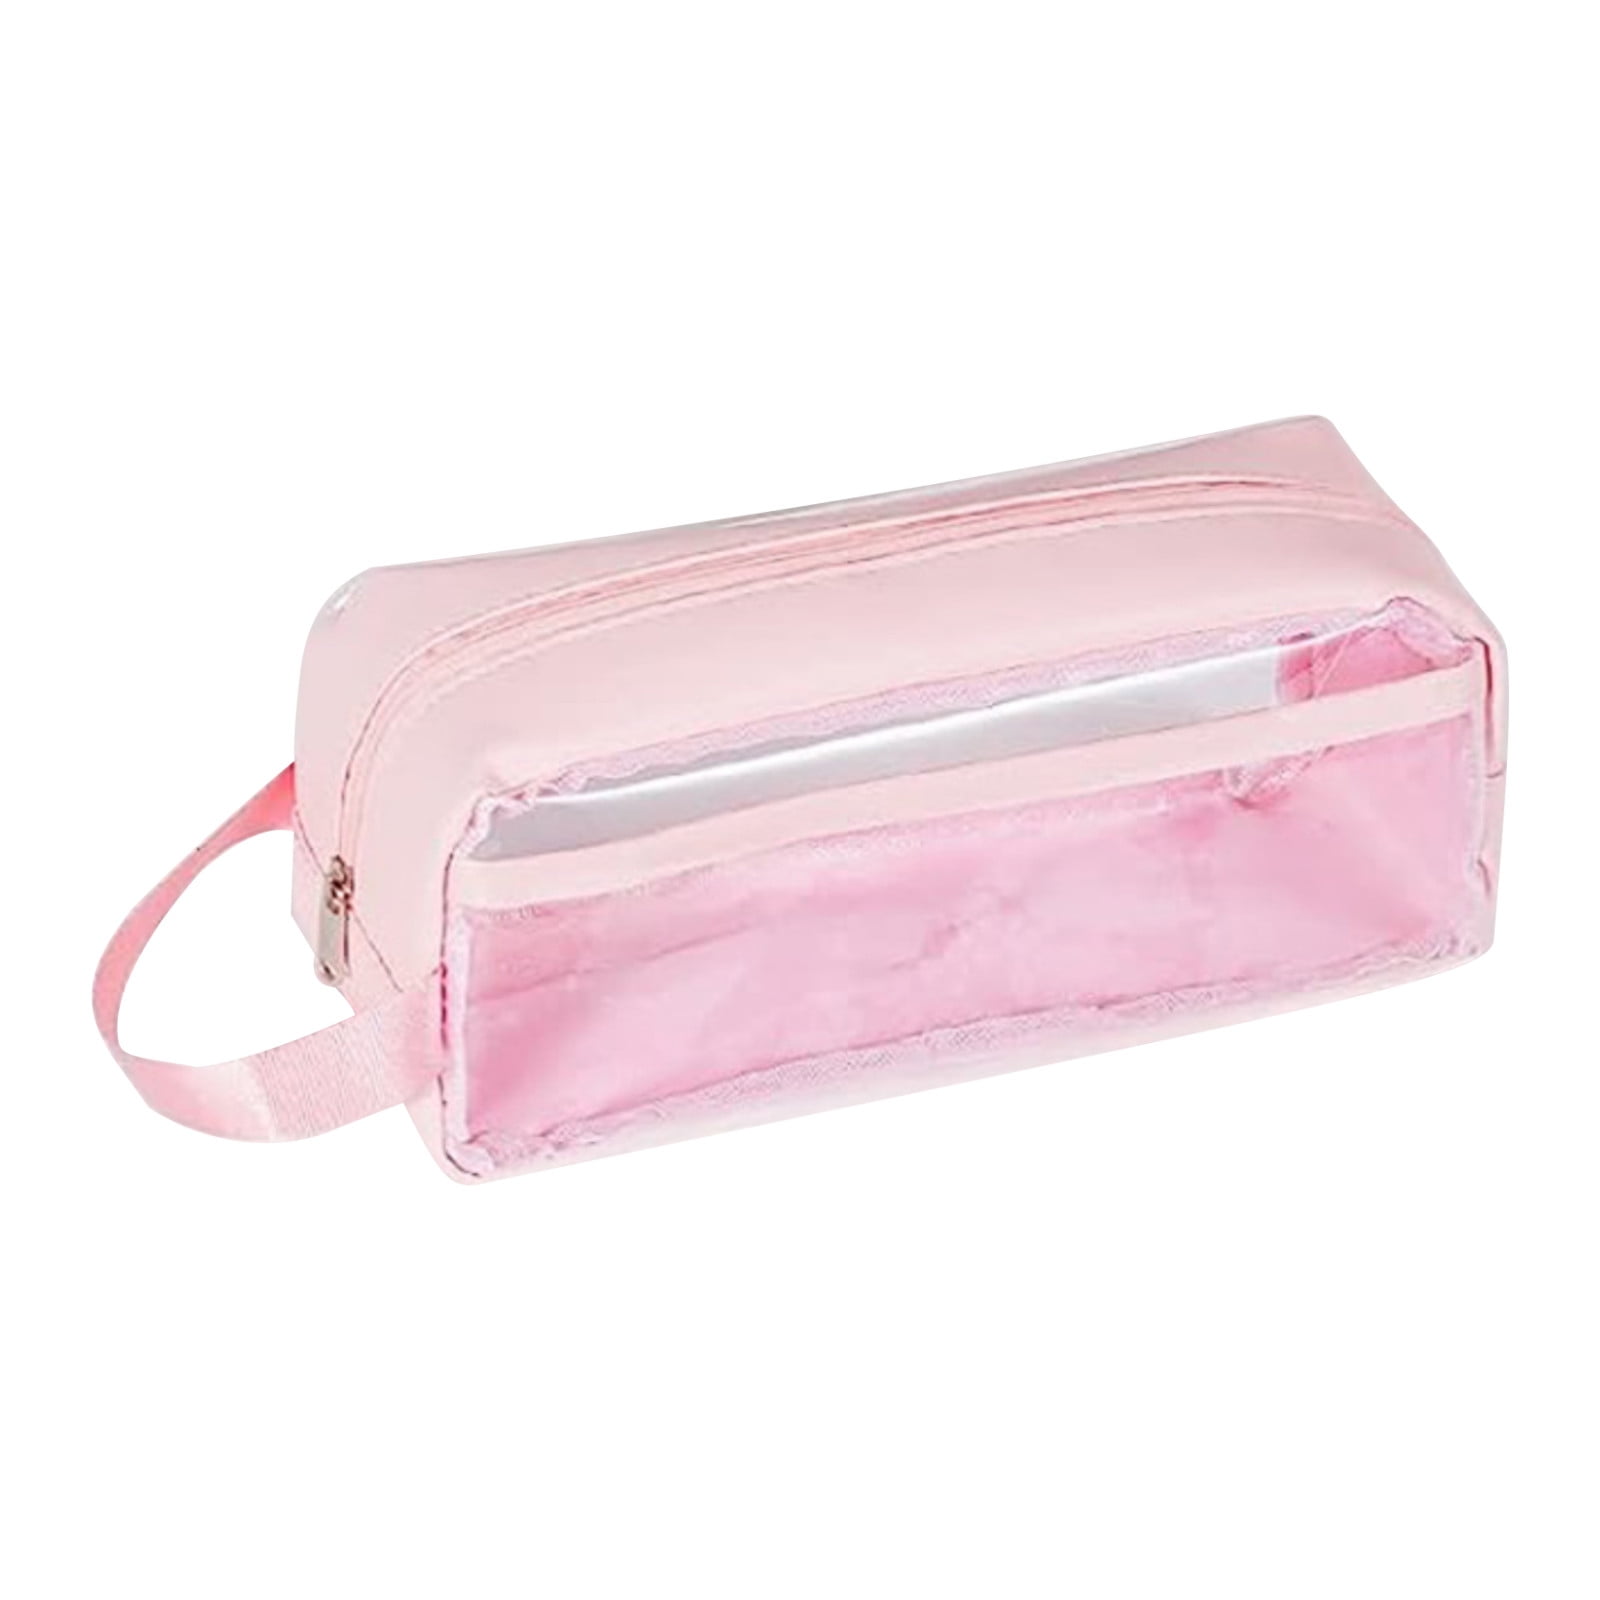 Back to School Supplies Under Lzobxe Pencil Case Pencil Pouch Transparent Large Capacity Visible Pencil Case, Minimalist Student Stationery Bag